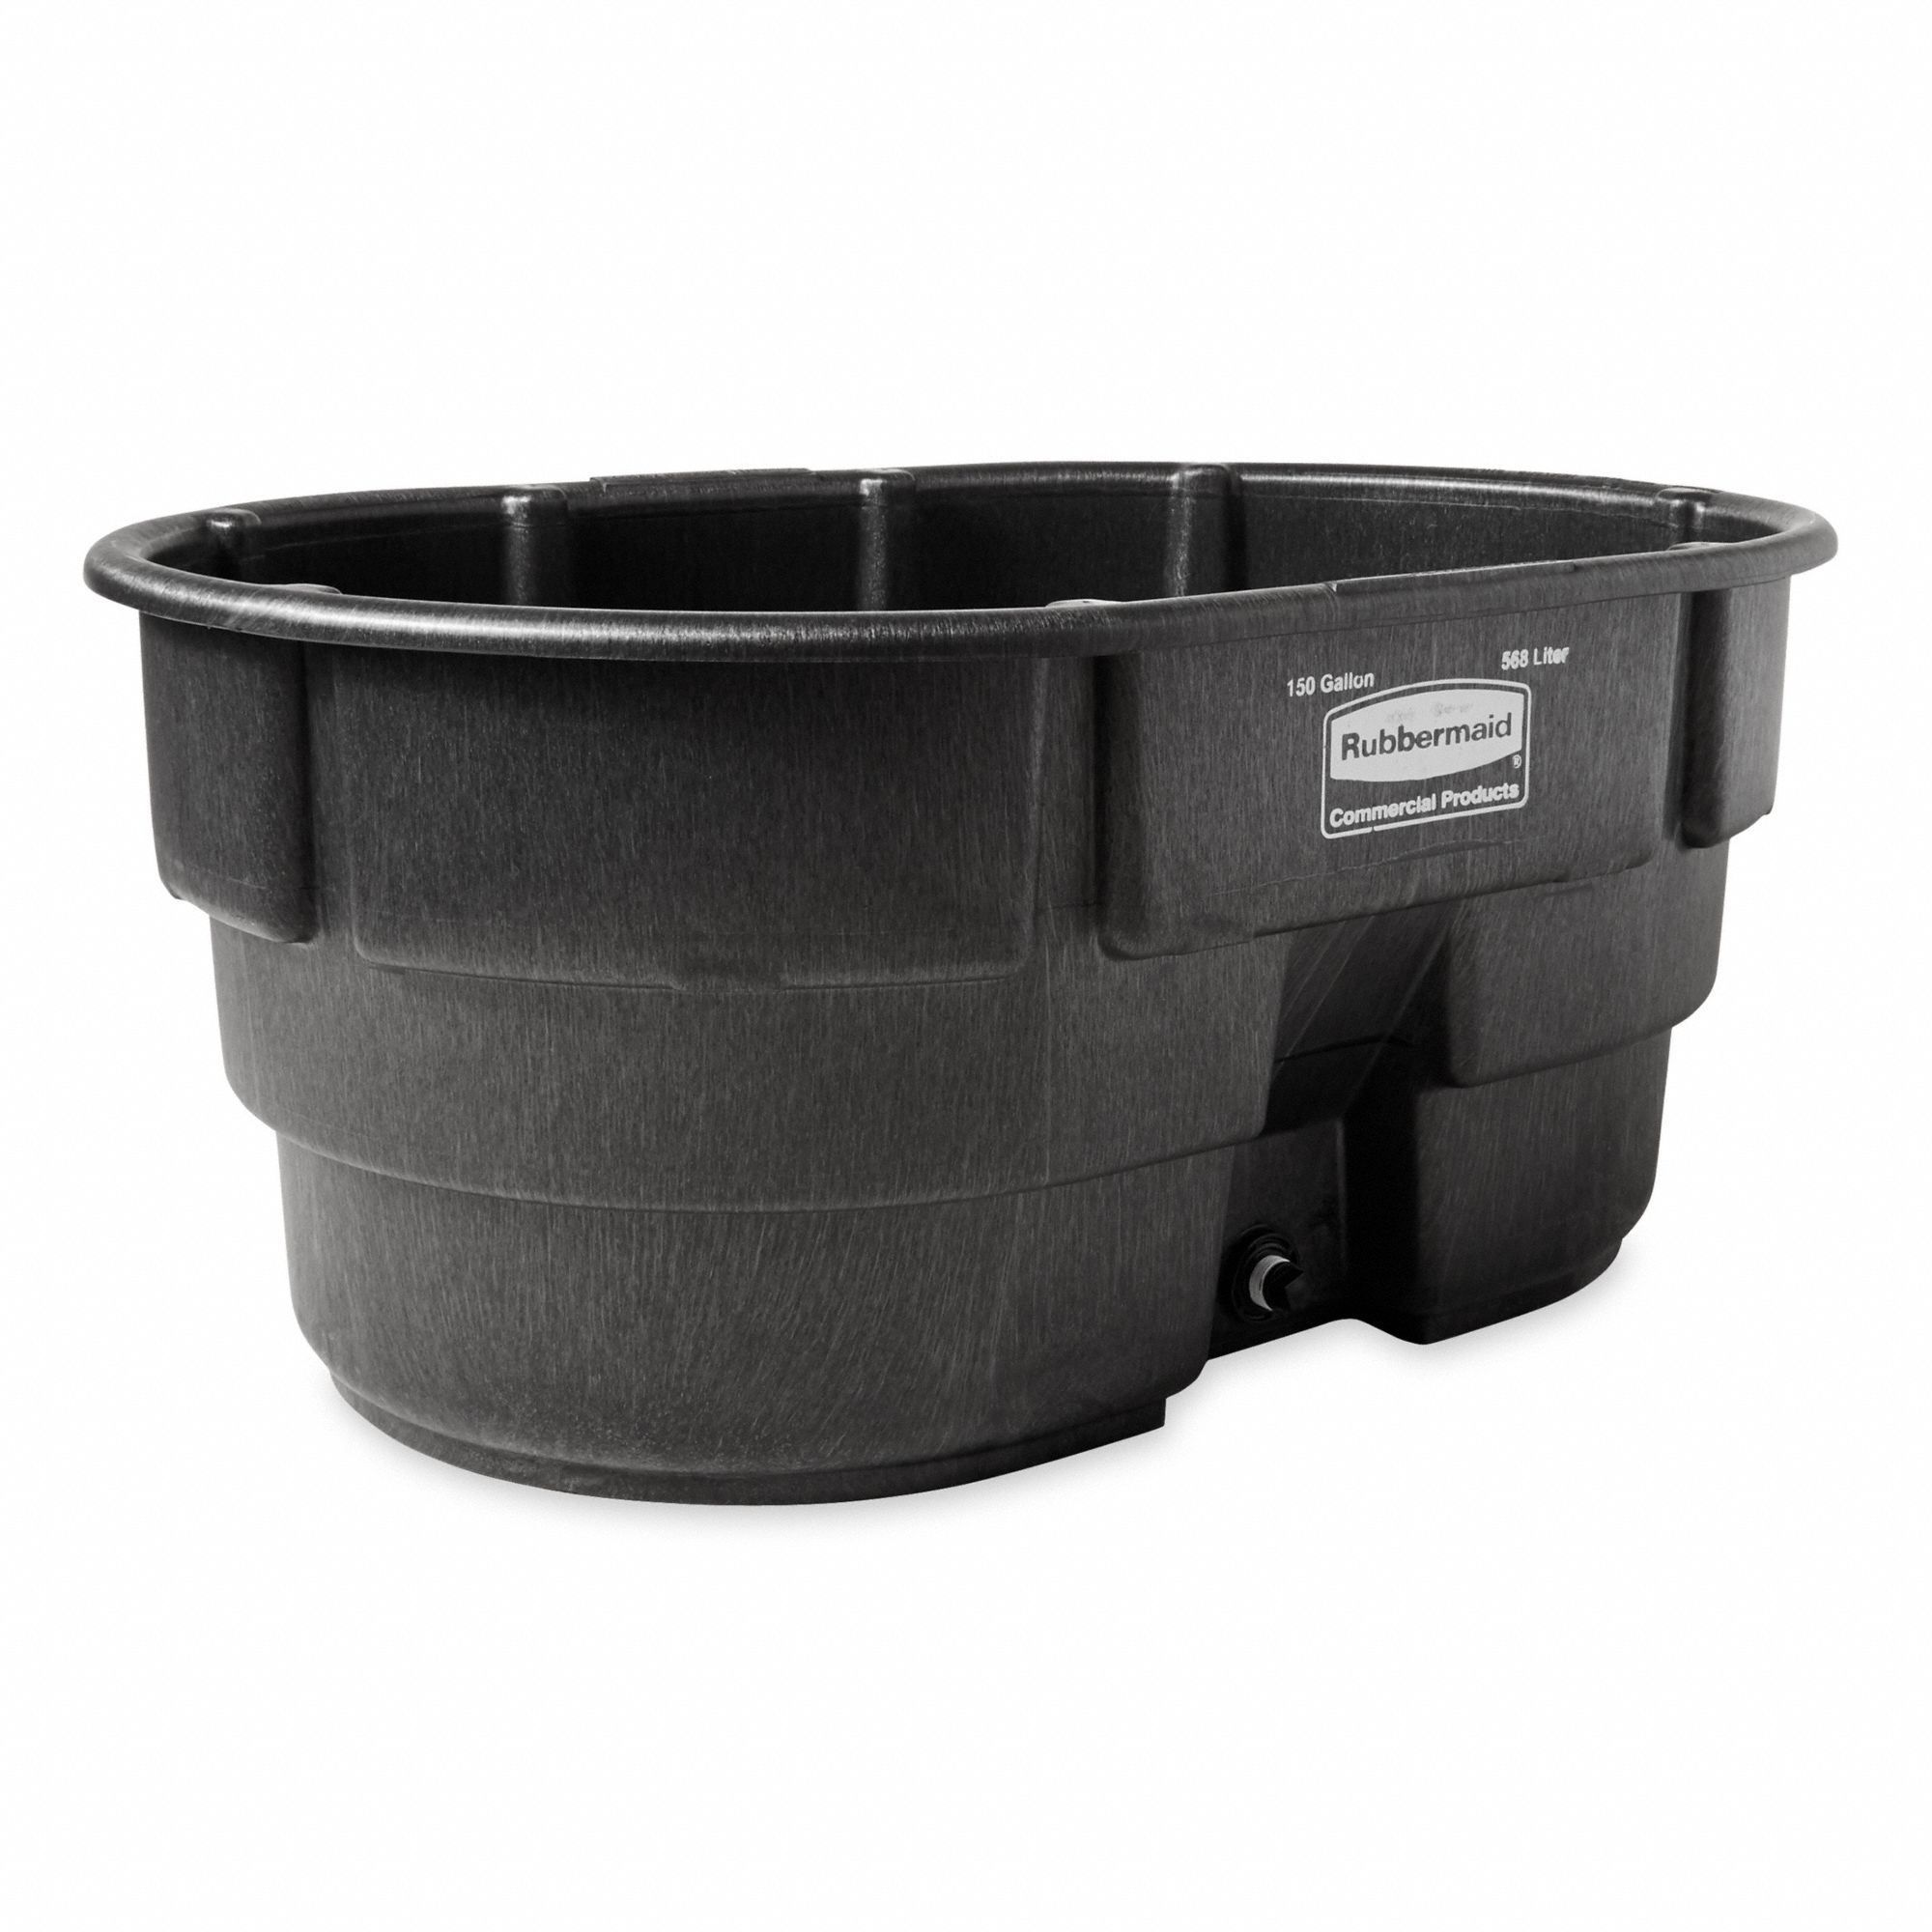 RUBBERMAID COMMERCIAL PRODUCTS Stock Tank: 150 gal, 58 in x 39 in x 25 in,  47 in x 29 in, Resin